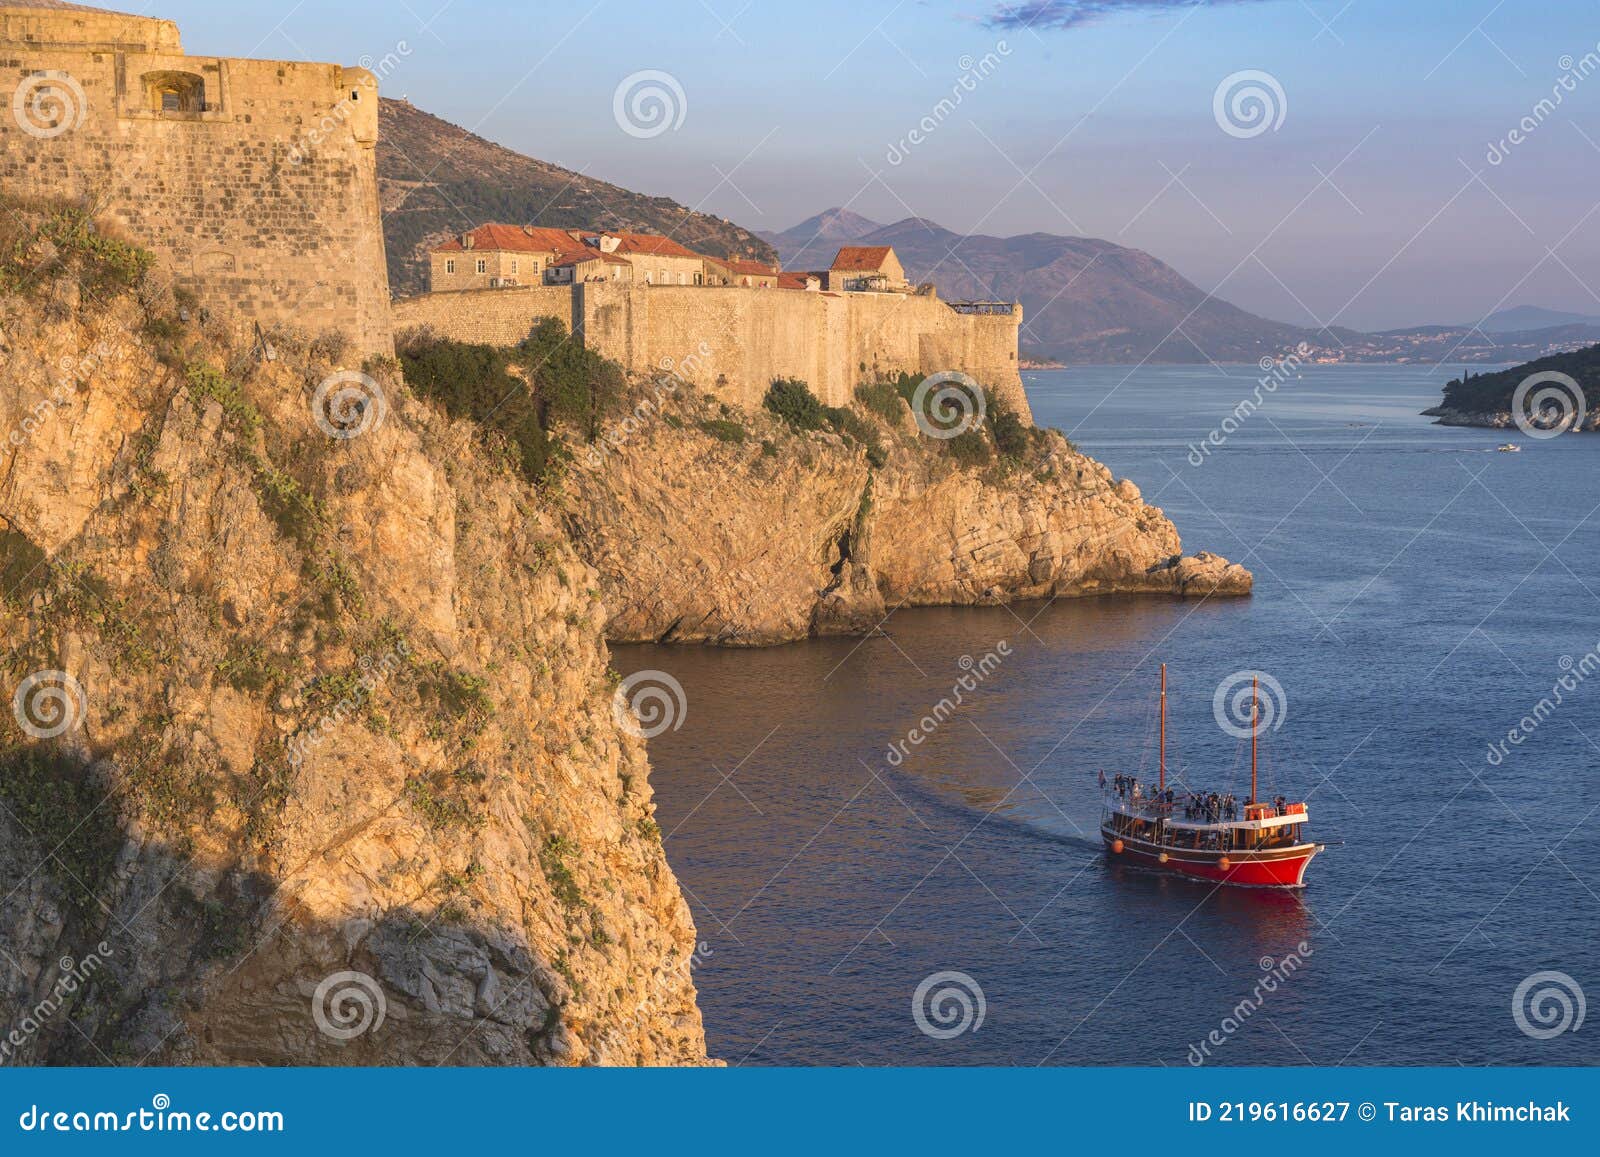 croatia. south dalmatia. aerial view of dubrovnik, medieval walled city and a read boat crossing the sea